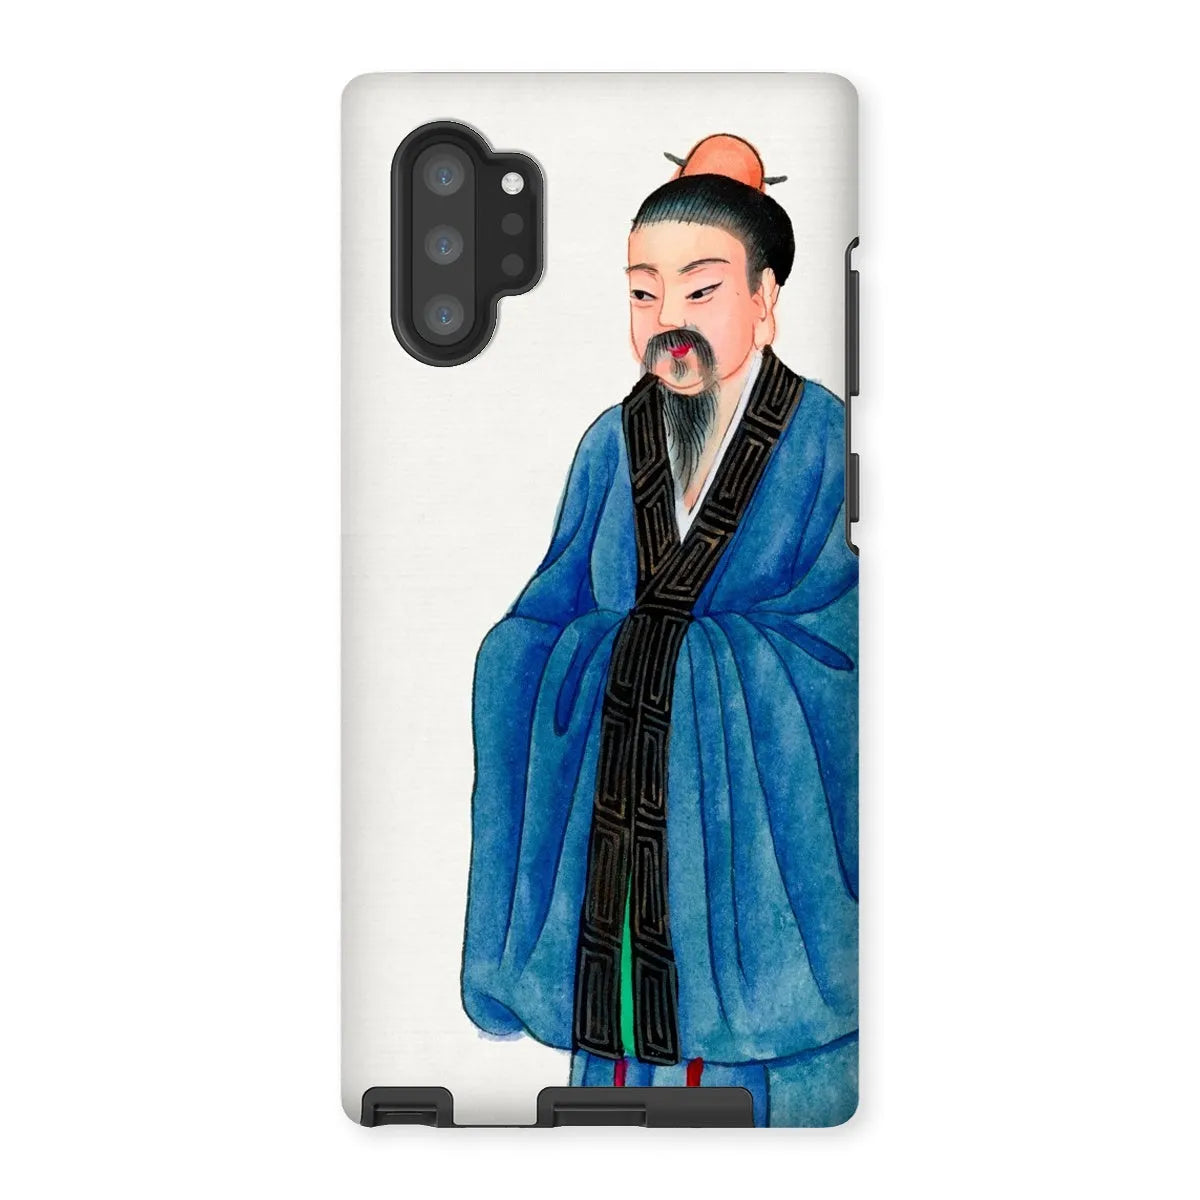 Grand Master - Chinese Buddhist Aesthetic Art Phone Case - Samsung Galaxy Note 10p / Matte - Mobile Phone Cases